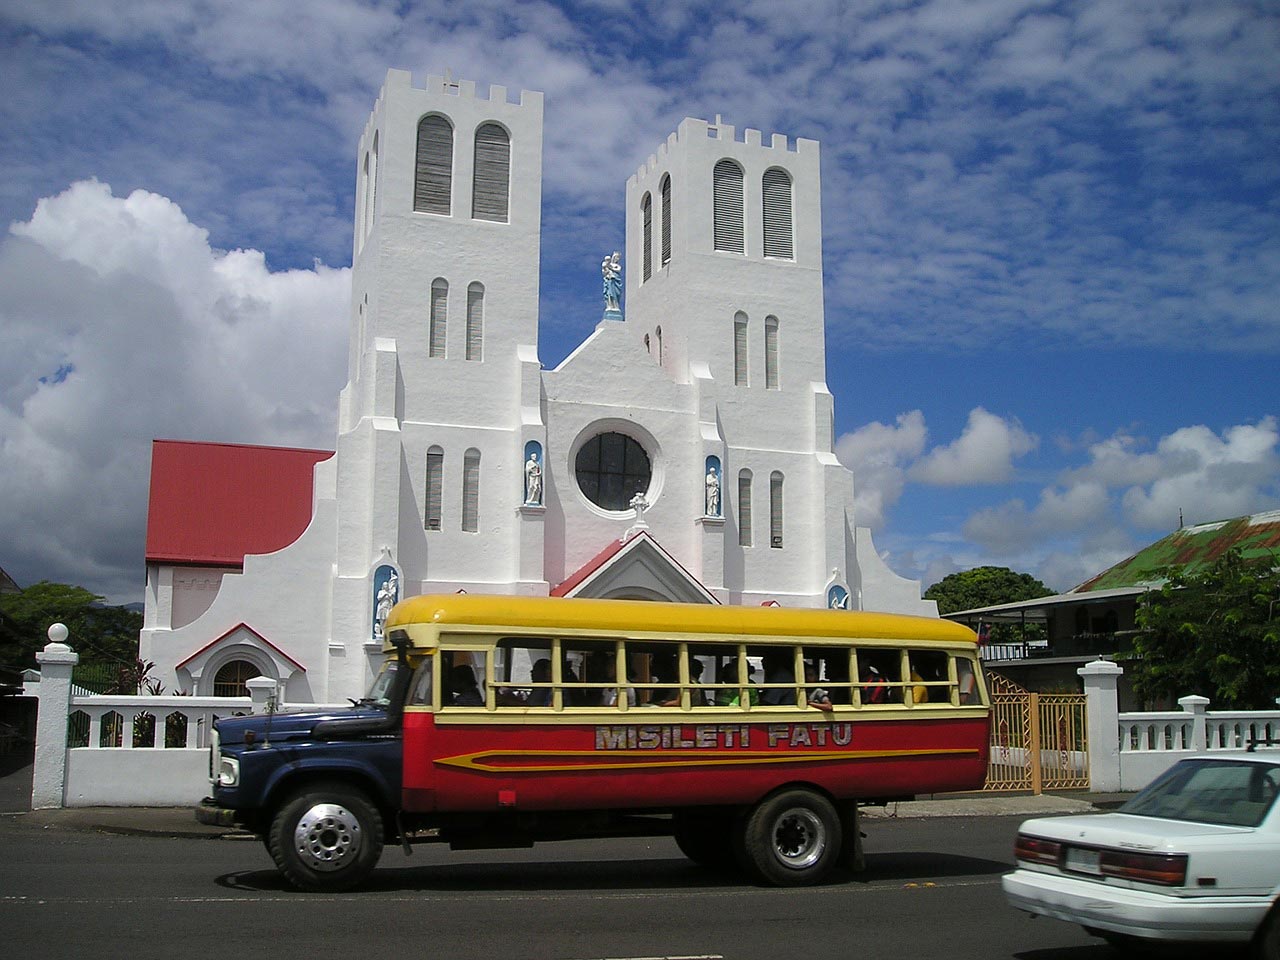 Samoa bus in front of church